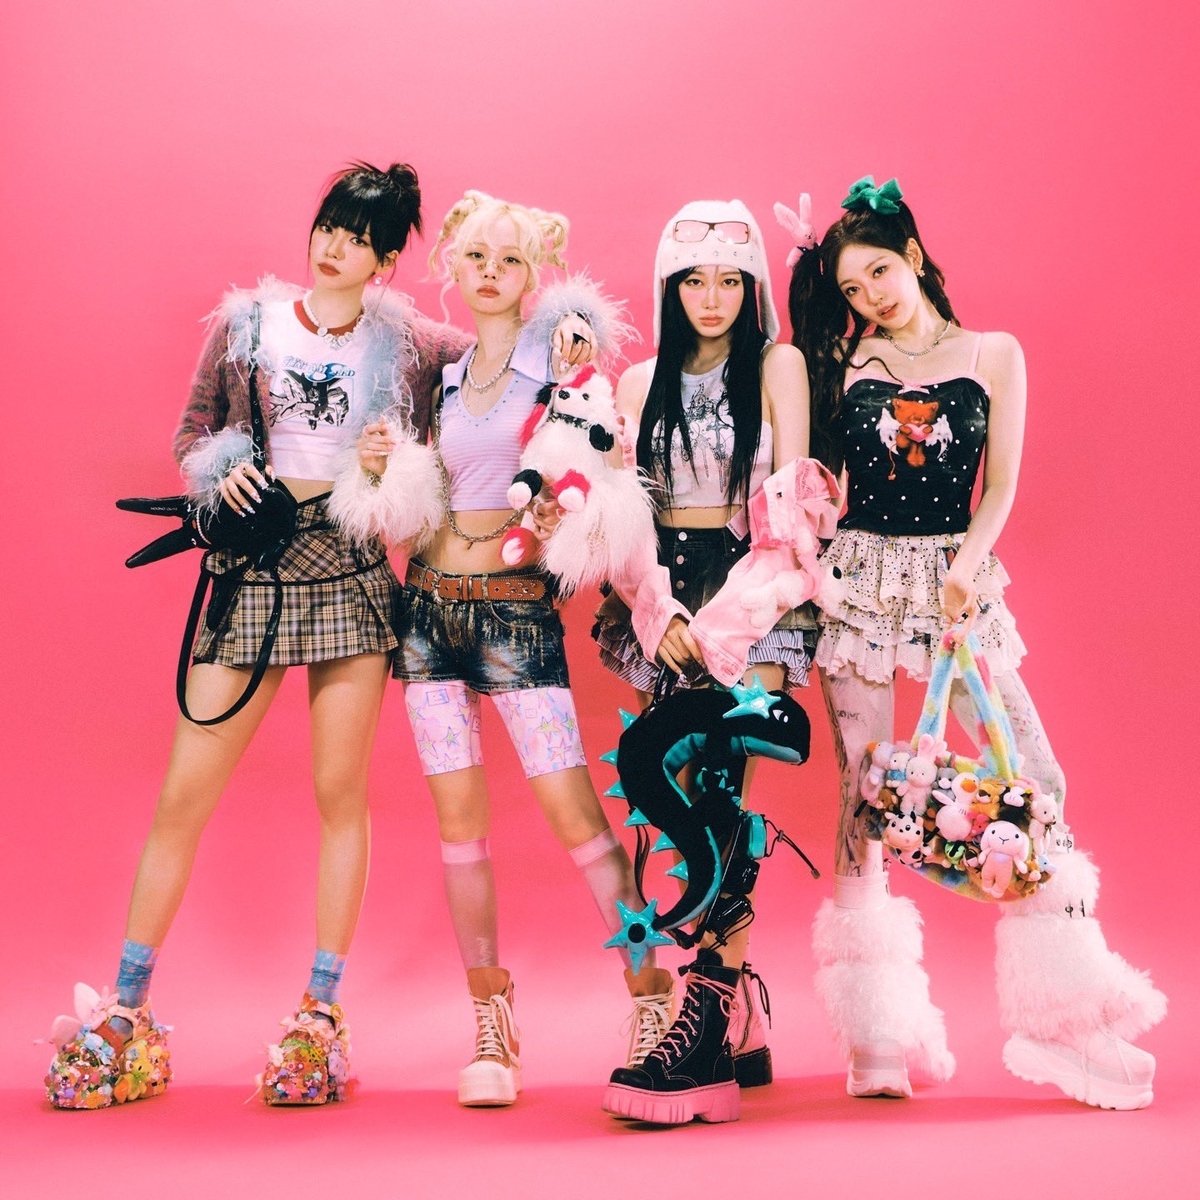 K-pop girl group aespa is seen in this concept image provided by SM Entertainment for its upcoming Japanese debut single, "Hot Mess." (PHOTO NOT FOR SALE) (Yonhap)